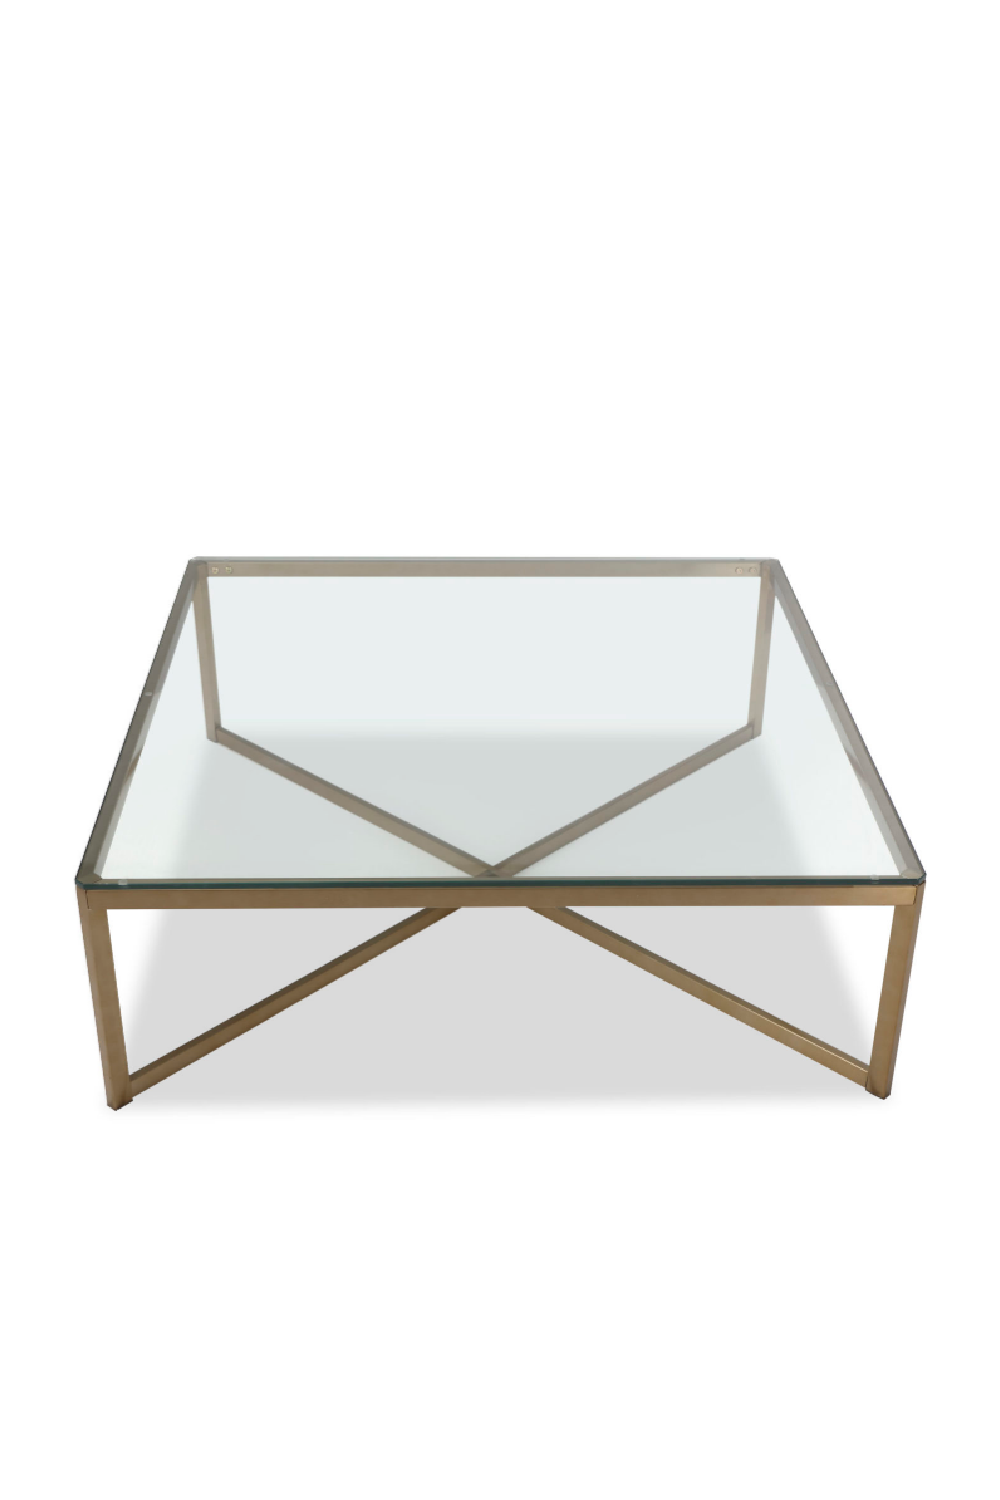 Brass Square Coffee Table | Liang & Eimil Musso | Oroa